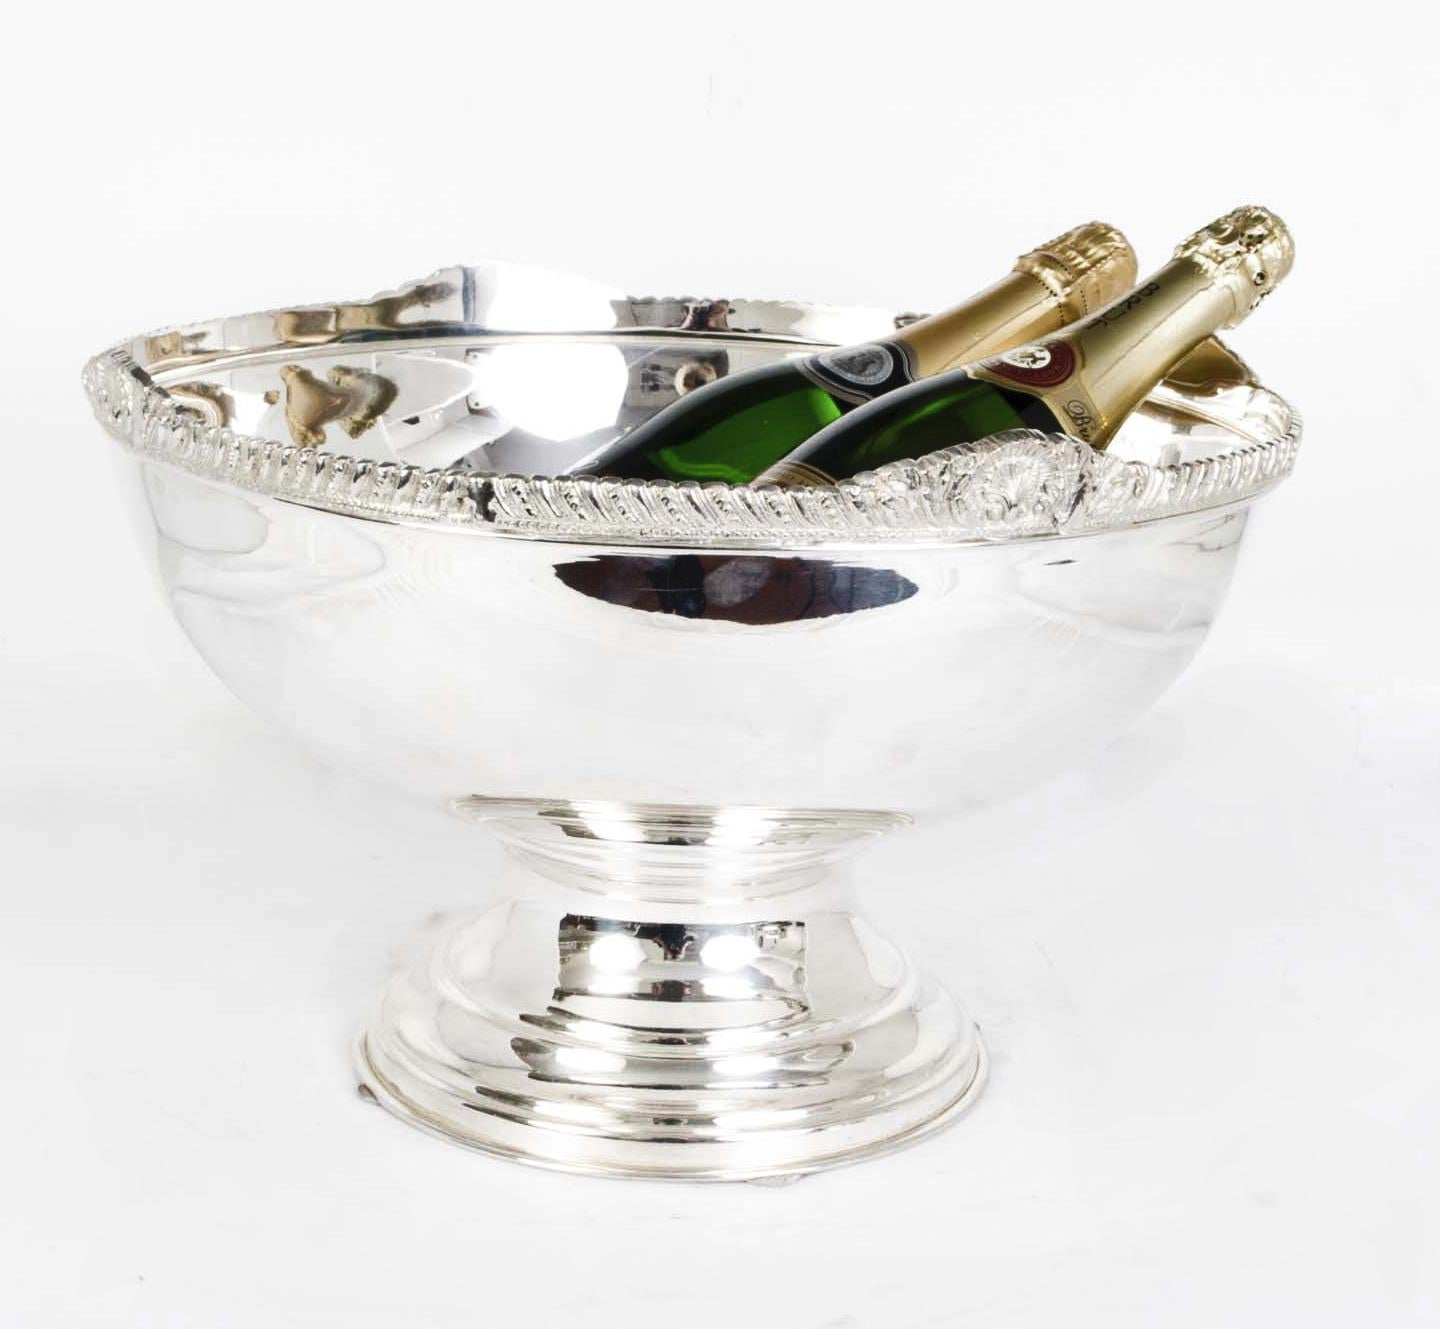 This is a beautiful large vintage silver plated champagne cooler that can acommodate 6 bottles with ease.

The quality and craftsmanship are superb and the bowl features beautiful gadrooned decoration around the top.

Add a touch of style to your